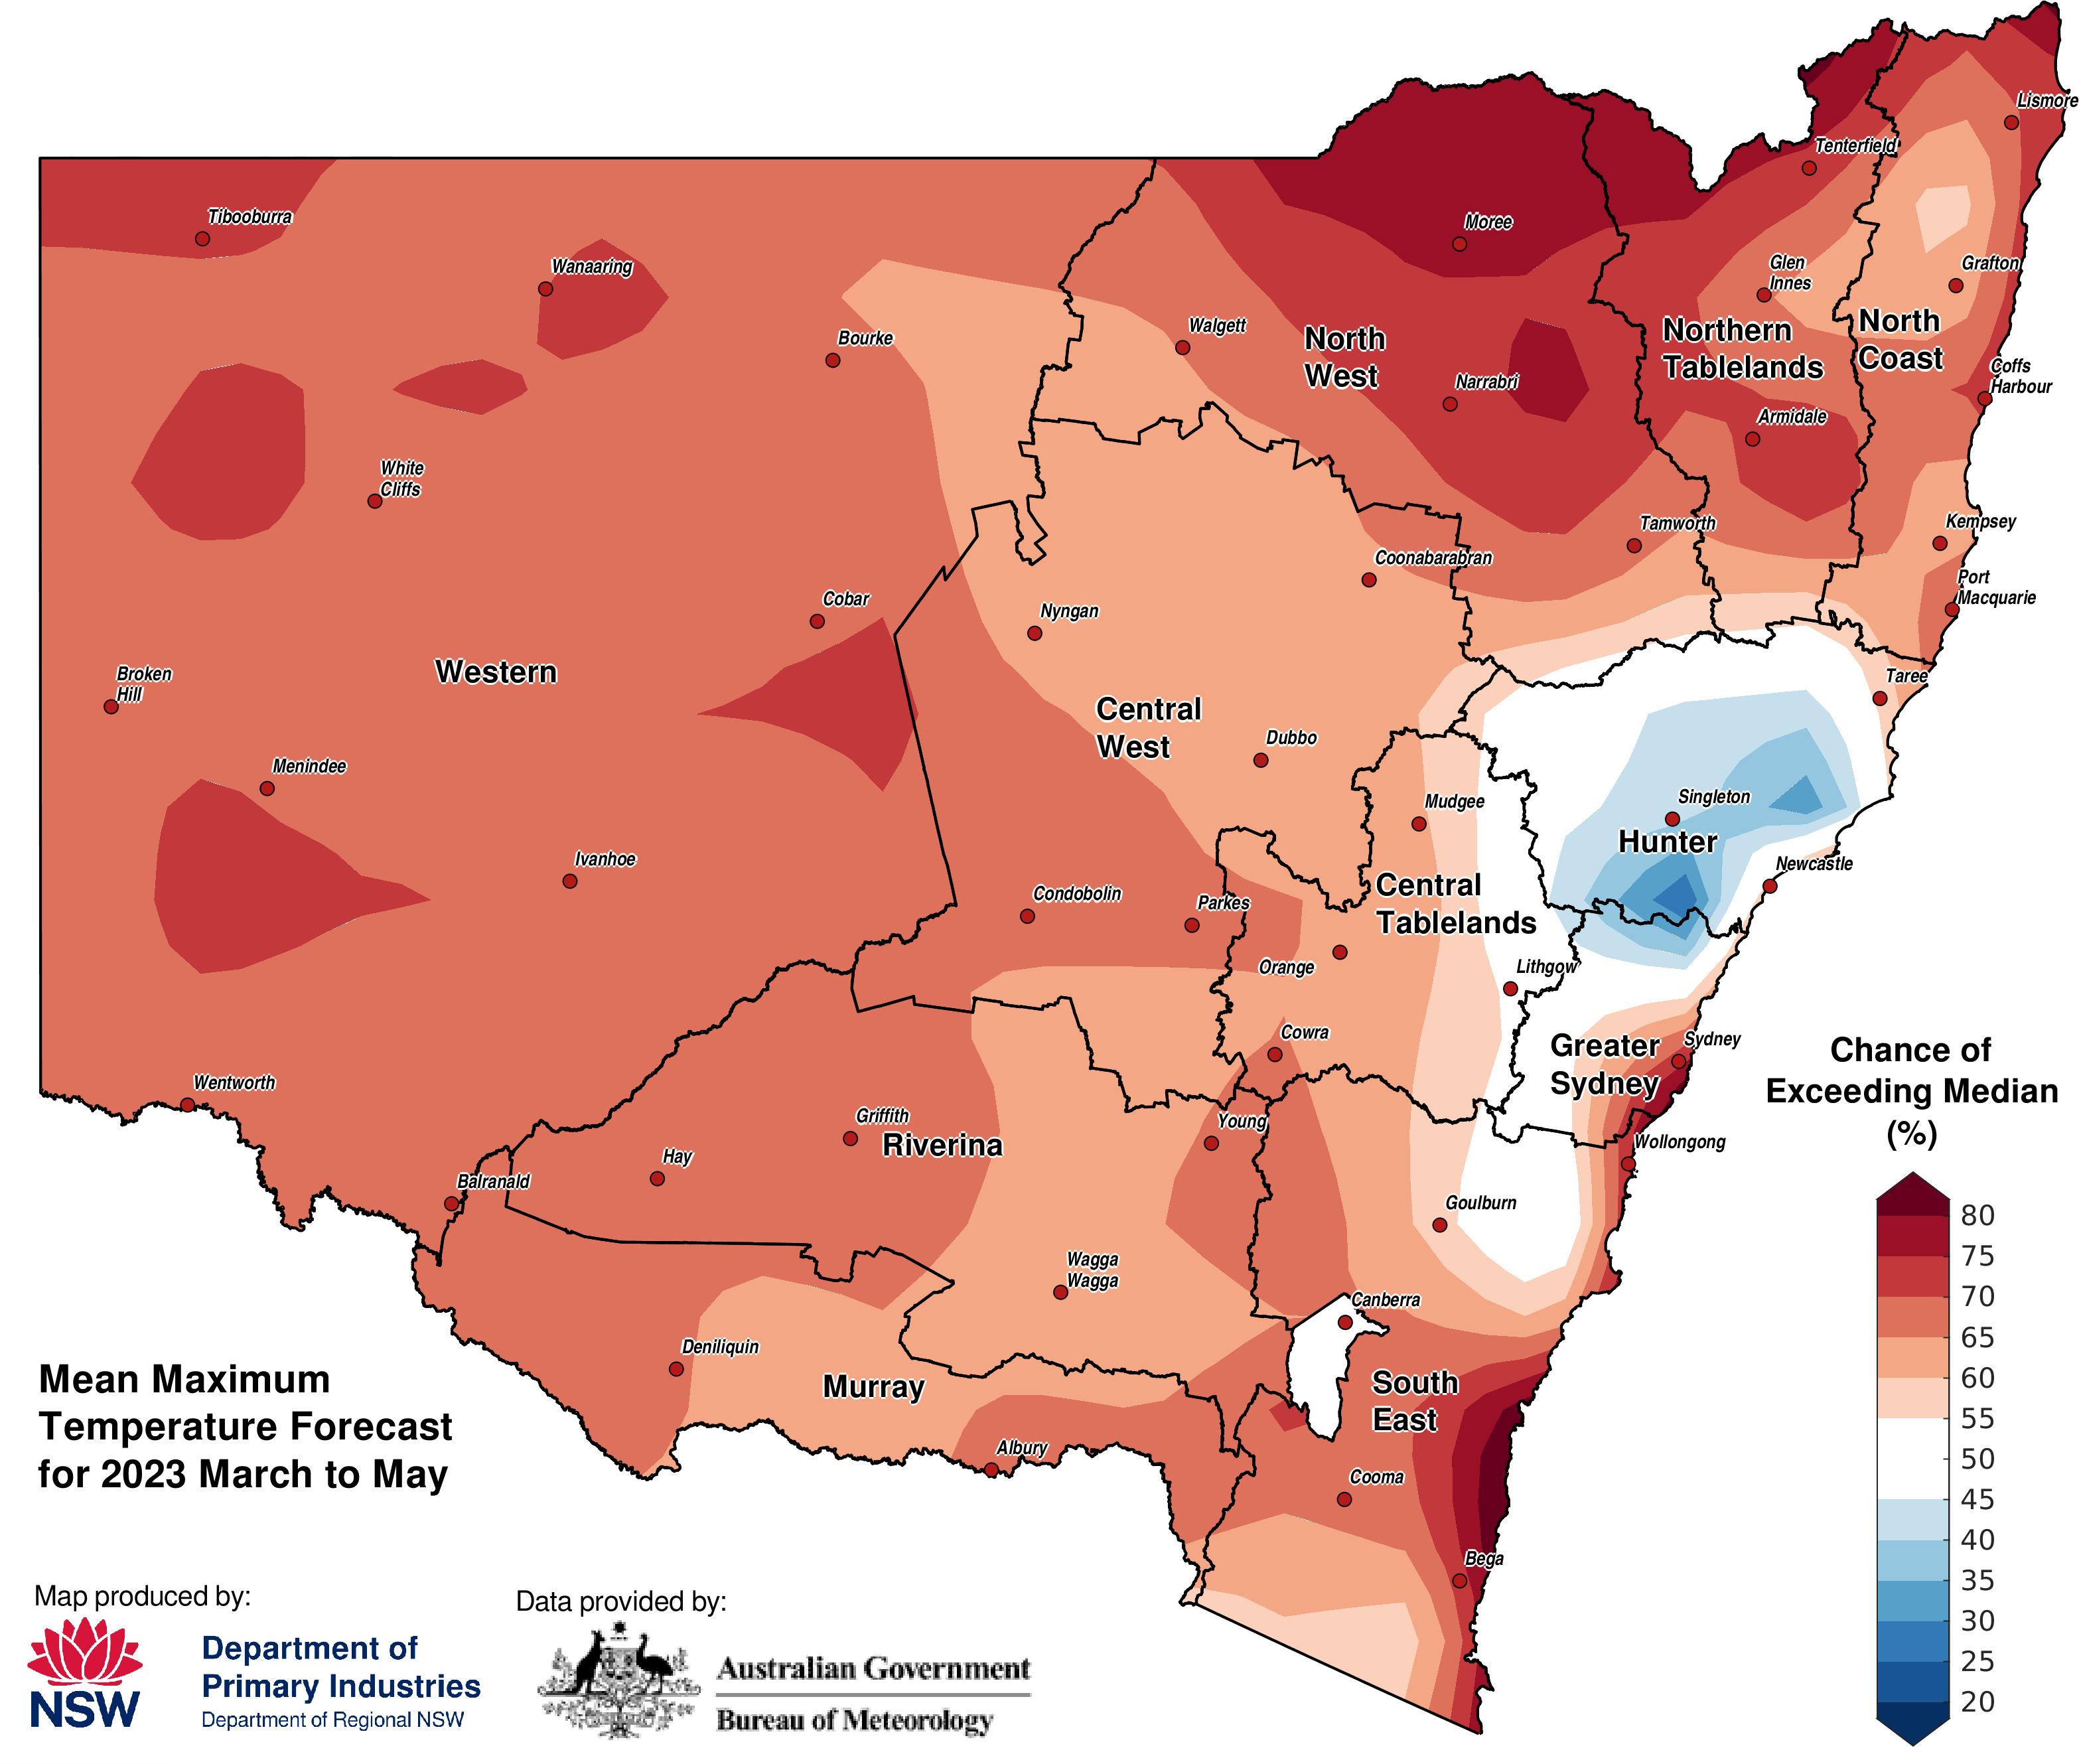 Figure 27. Seasonal average maximum temperature outlook for NSW issued on 9 February 2023